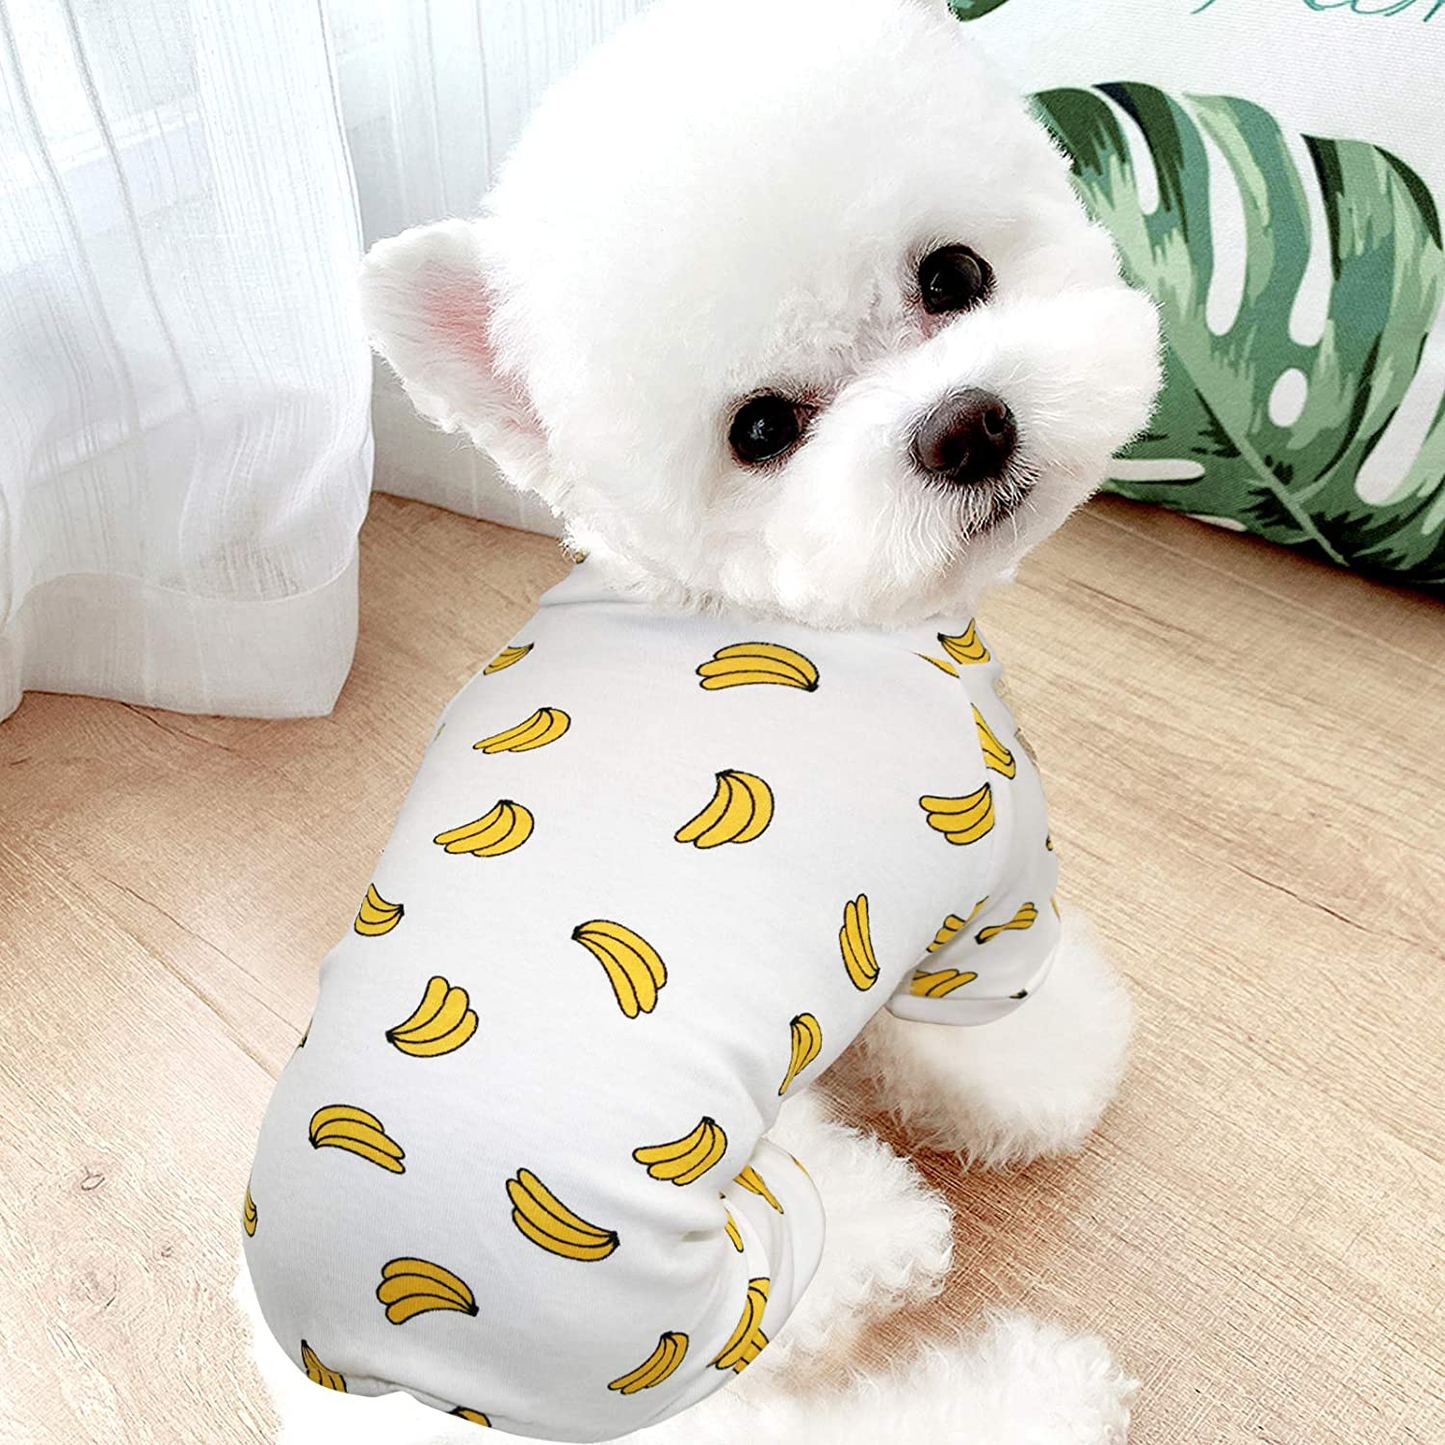 HYLYUN Puppy Pajamas 2 Packs - Adorable Puppy Clothes Soft Dog Pajamas Cotton Puppy Rompers Pet Jumpsuits Cozy Bodysuits for Small Dogs